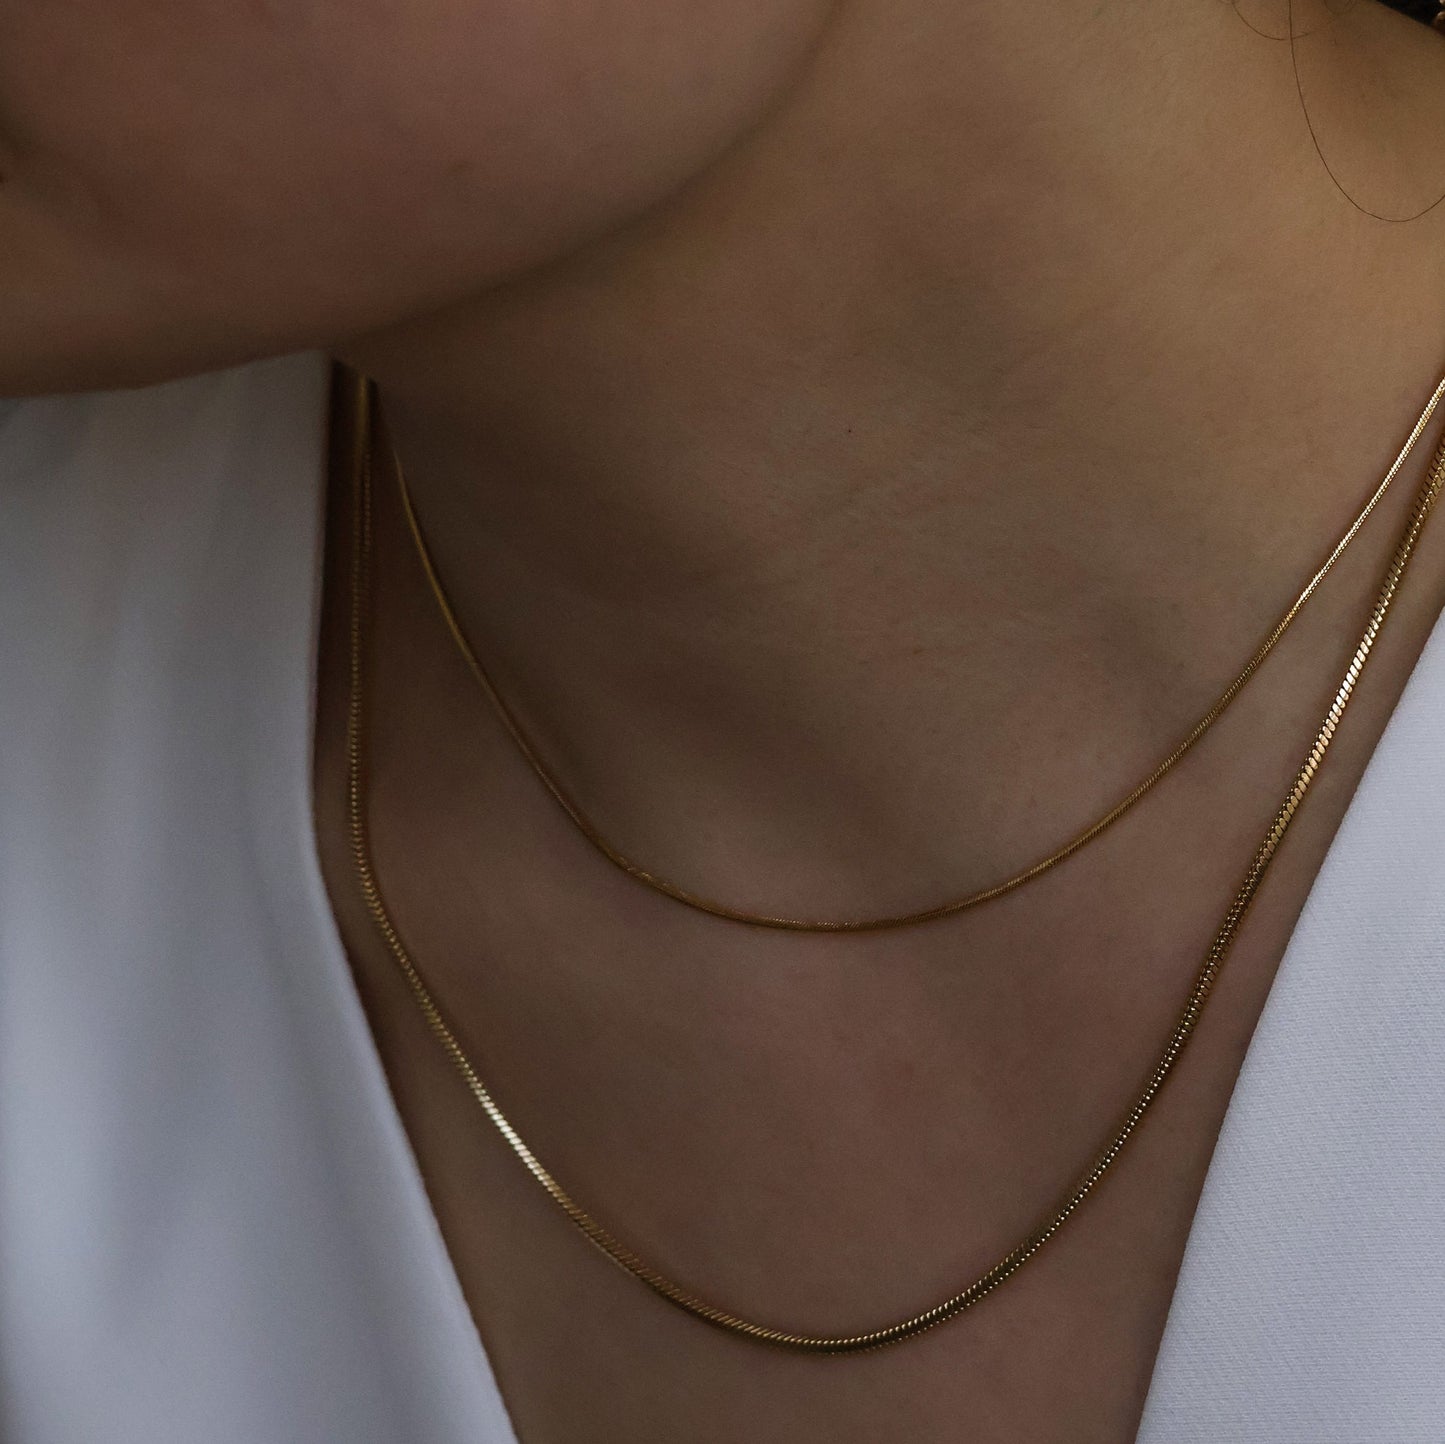 Plain necklace chains gold plated tarnish proof